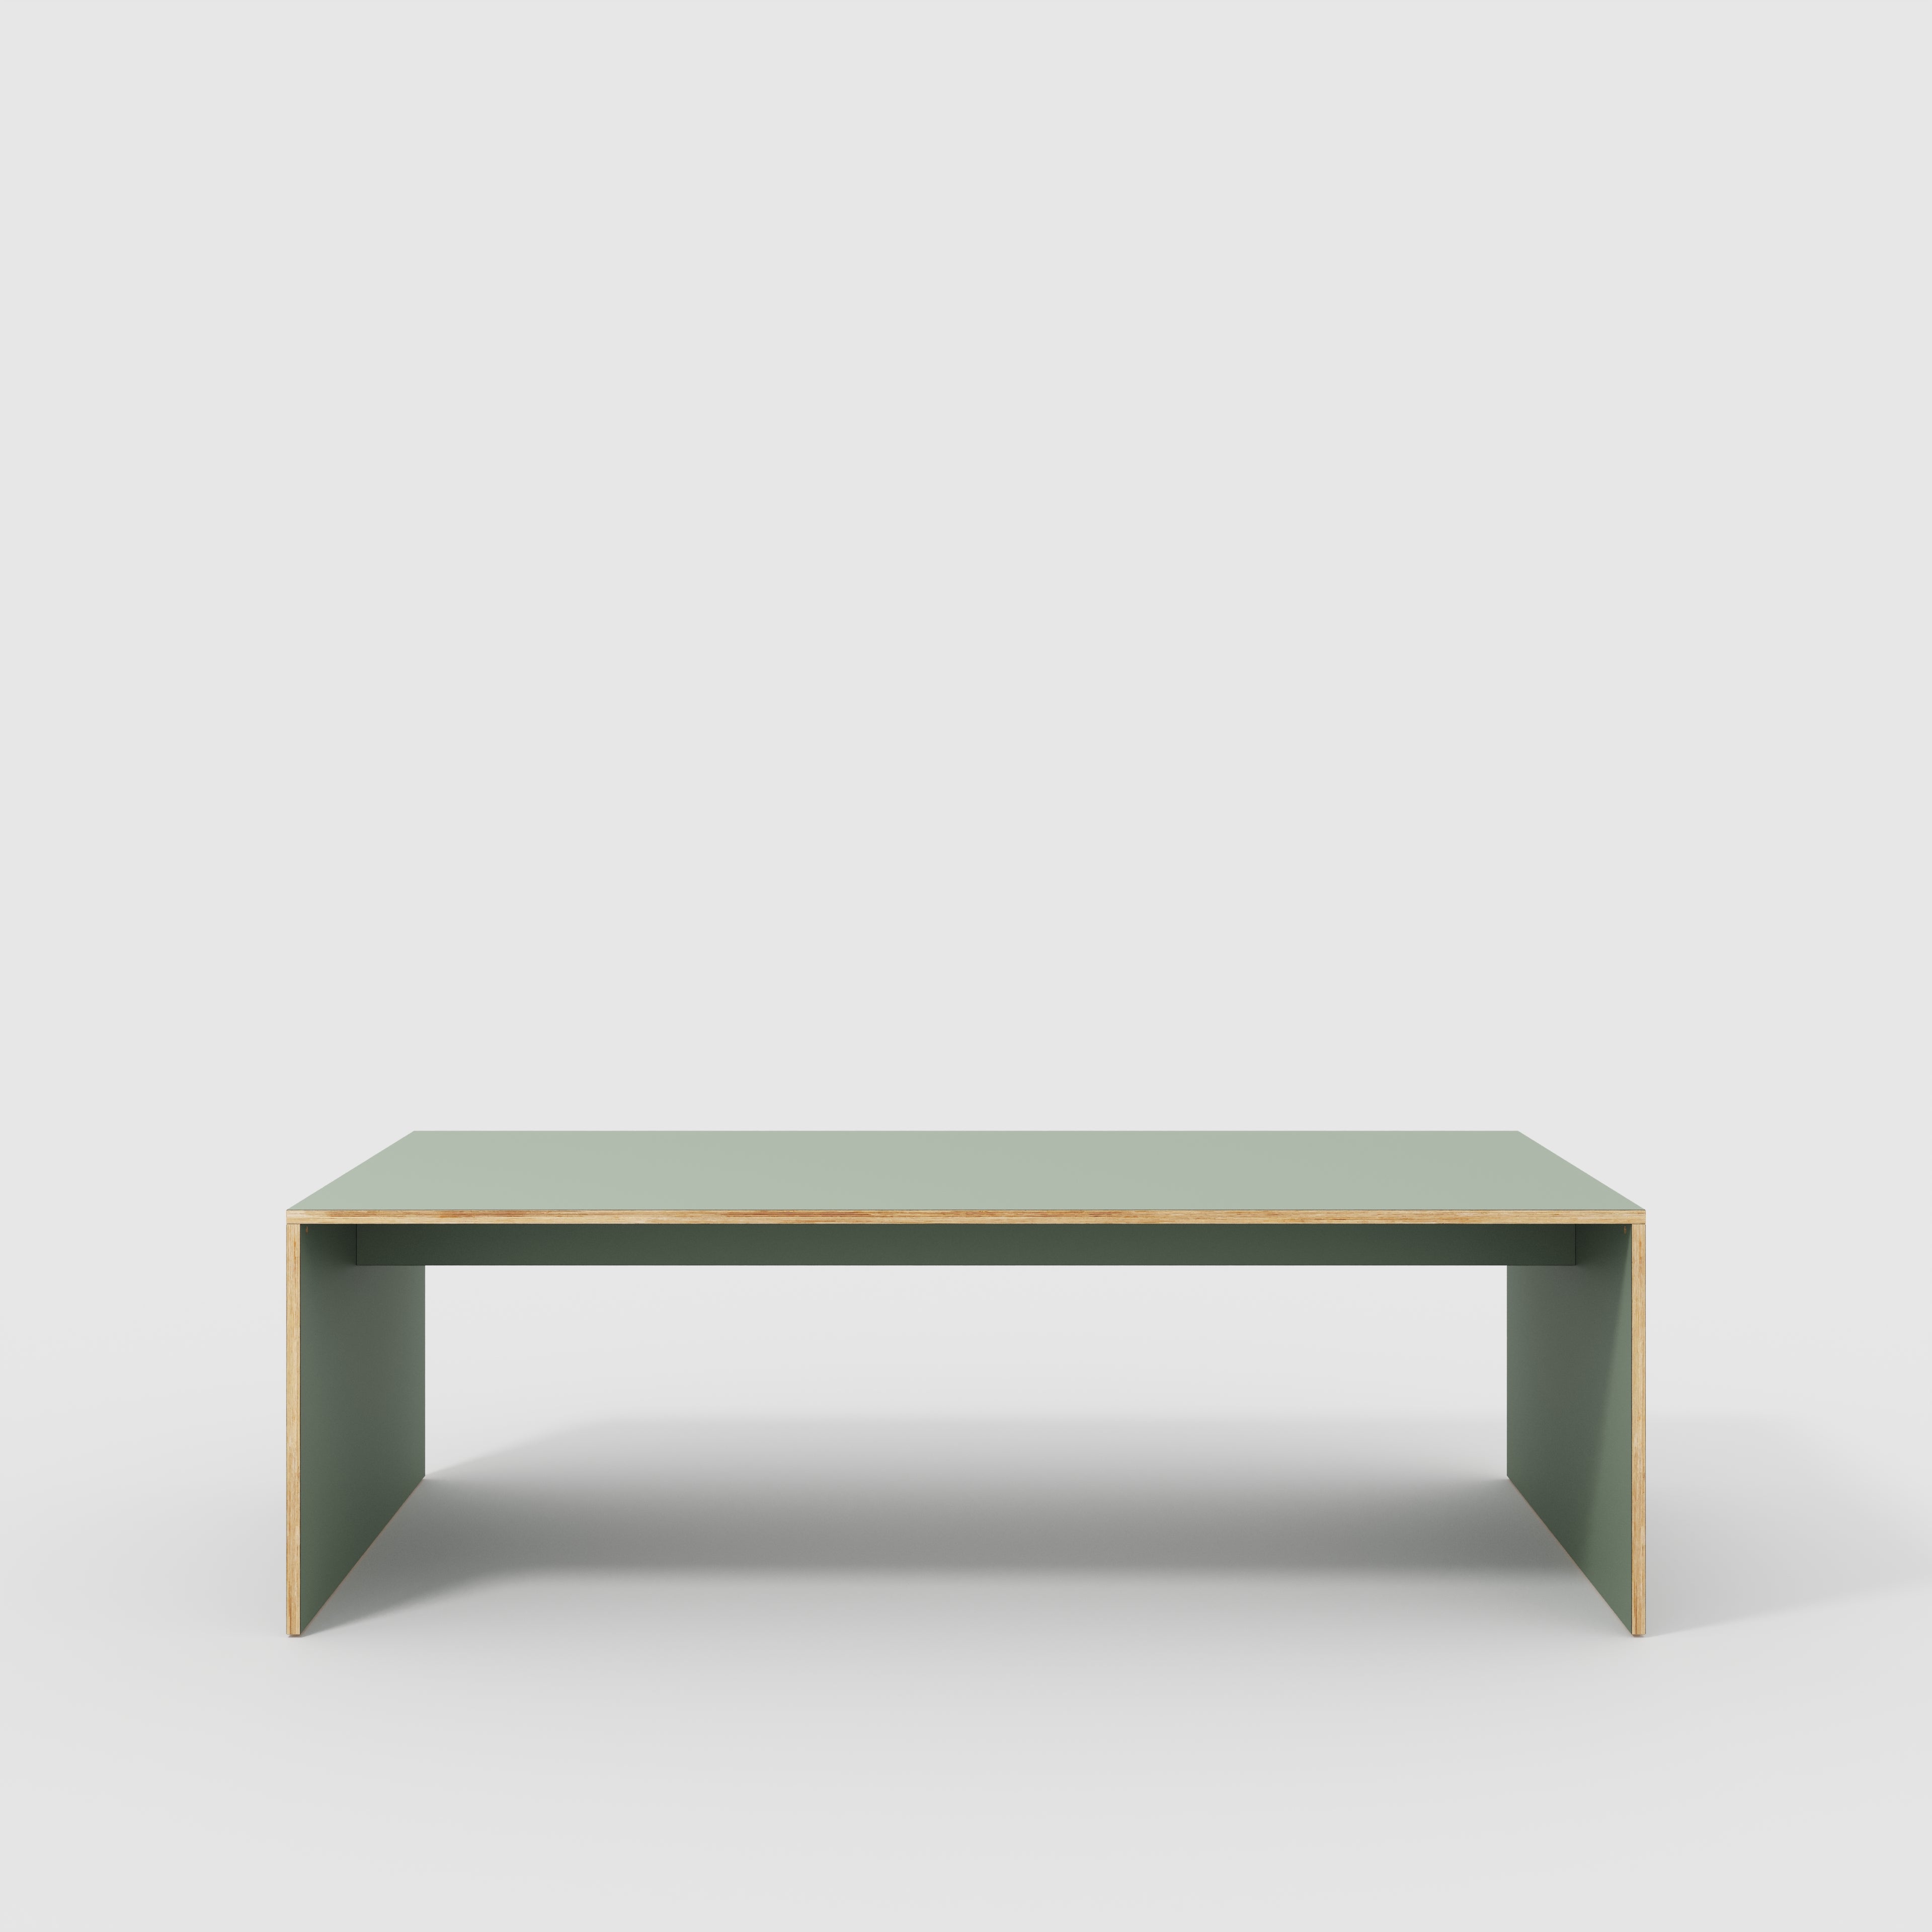 Table with Solid Sides - Formica Green Slate - 2400(w) x 1200(d) x 750(h)